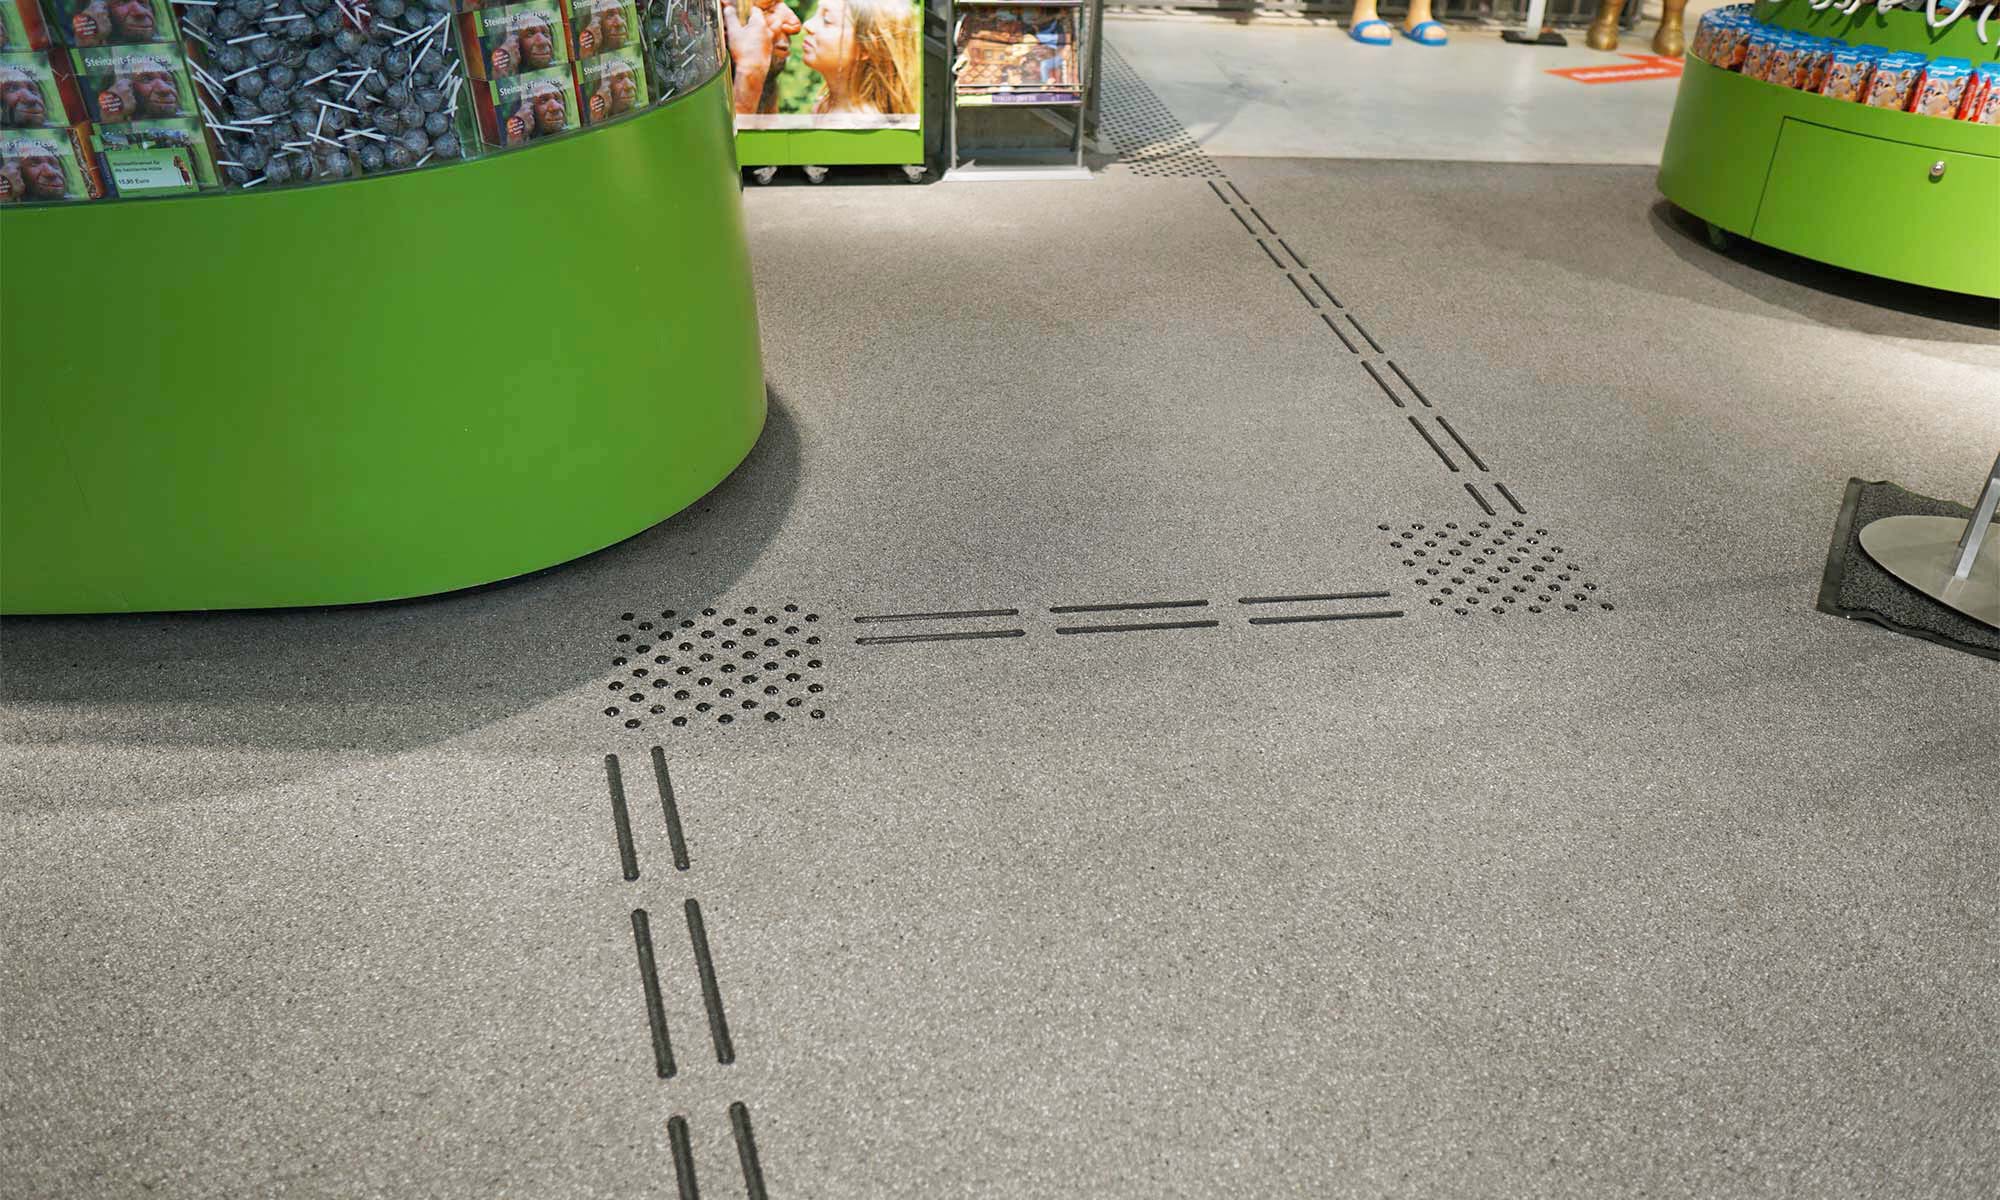 On the picture you can see floor indicators in the exit area of the museum. Paths are shown in this guidance system with two adjacent dashed black lines. These are interrupted by a square, black dotted area at the points where the path continues in a different direction.